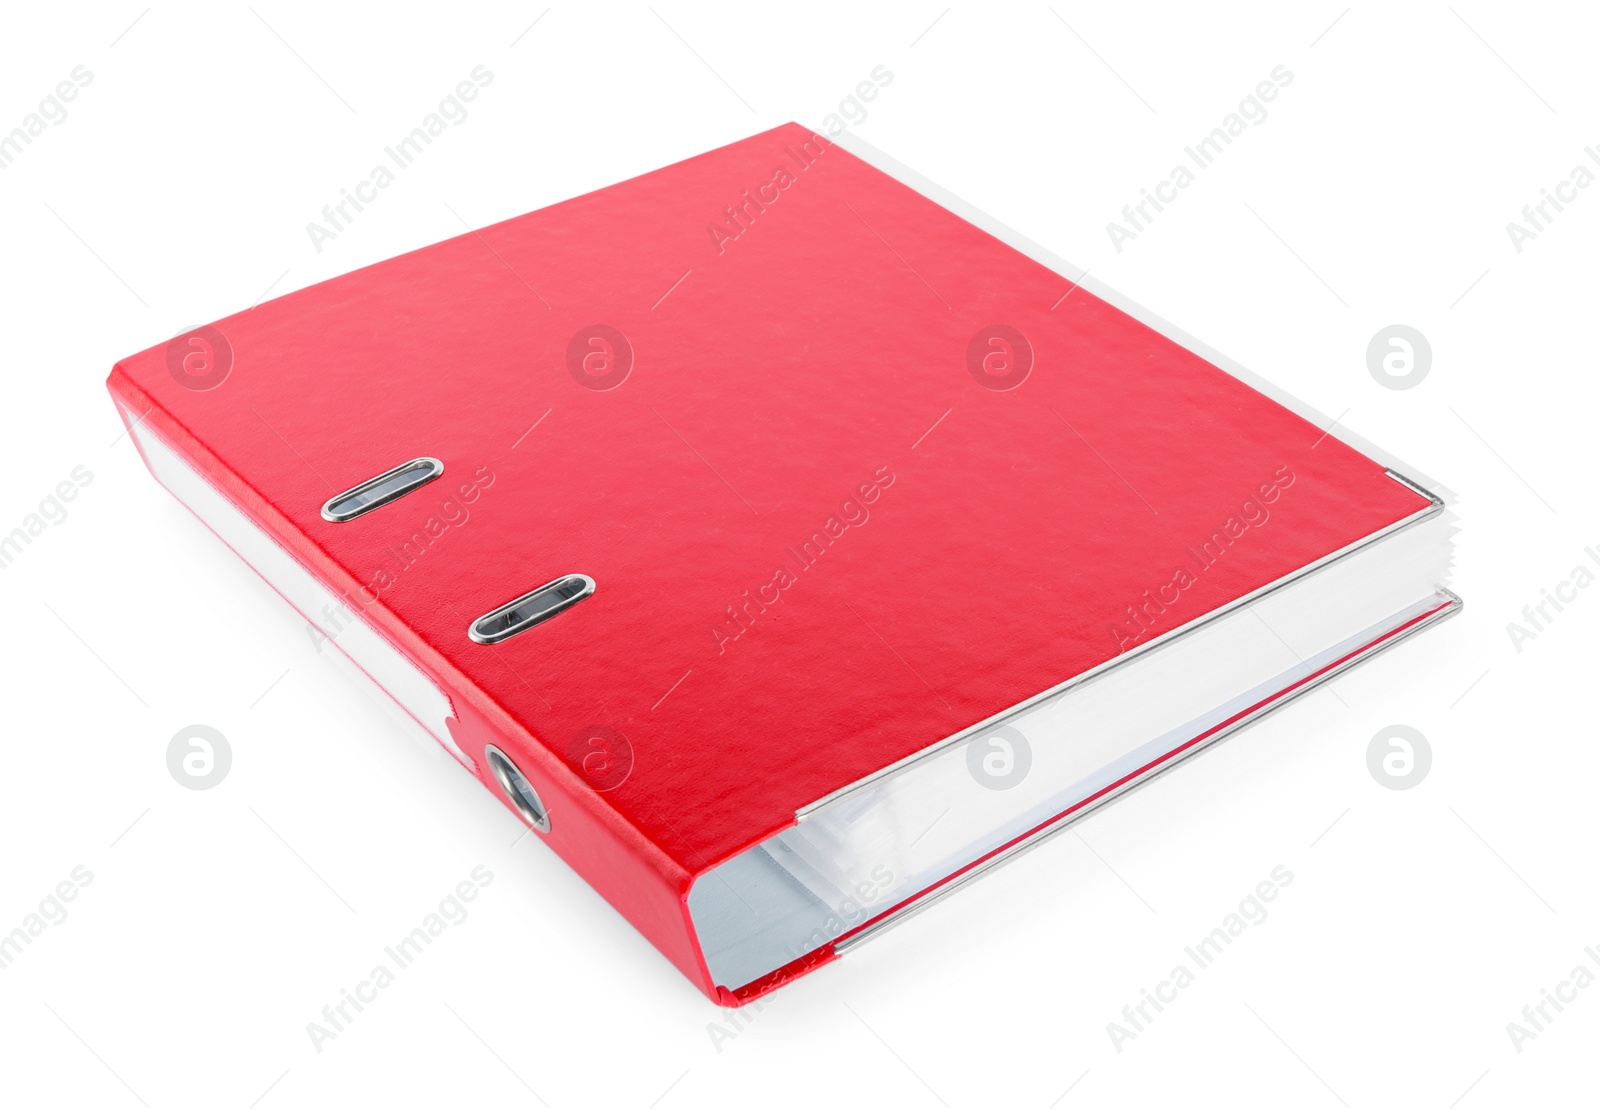 Photo of One red office folder isolated on white